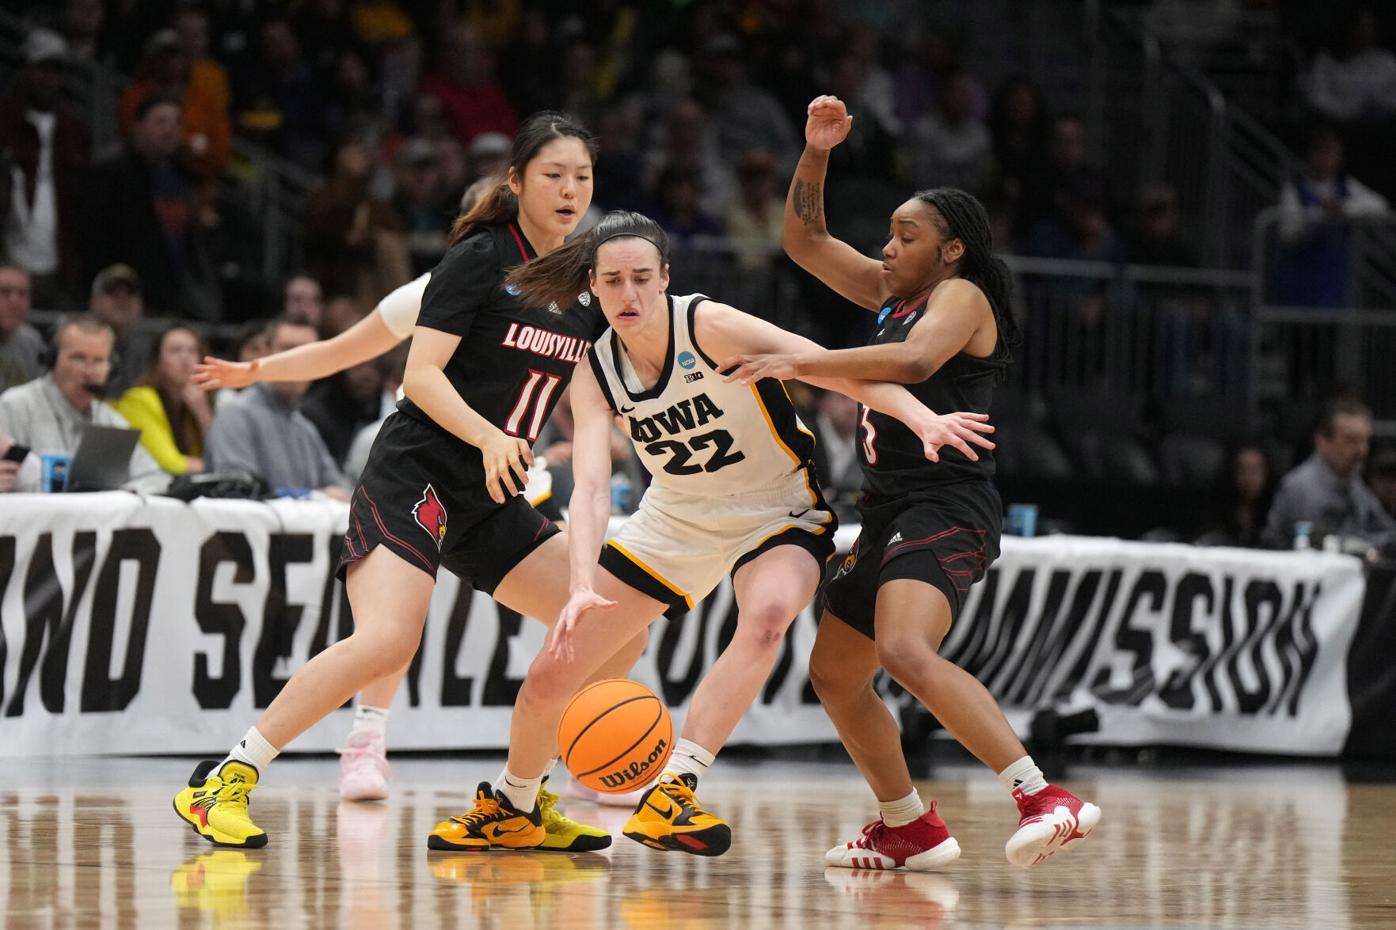 Iowa Women's Hoops comes to Seattle with Final Four dreams